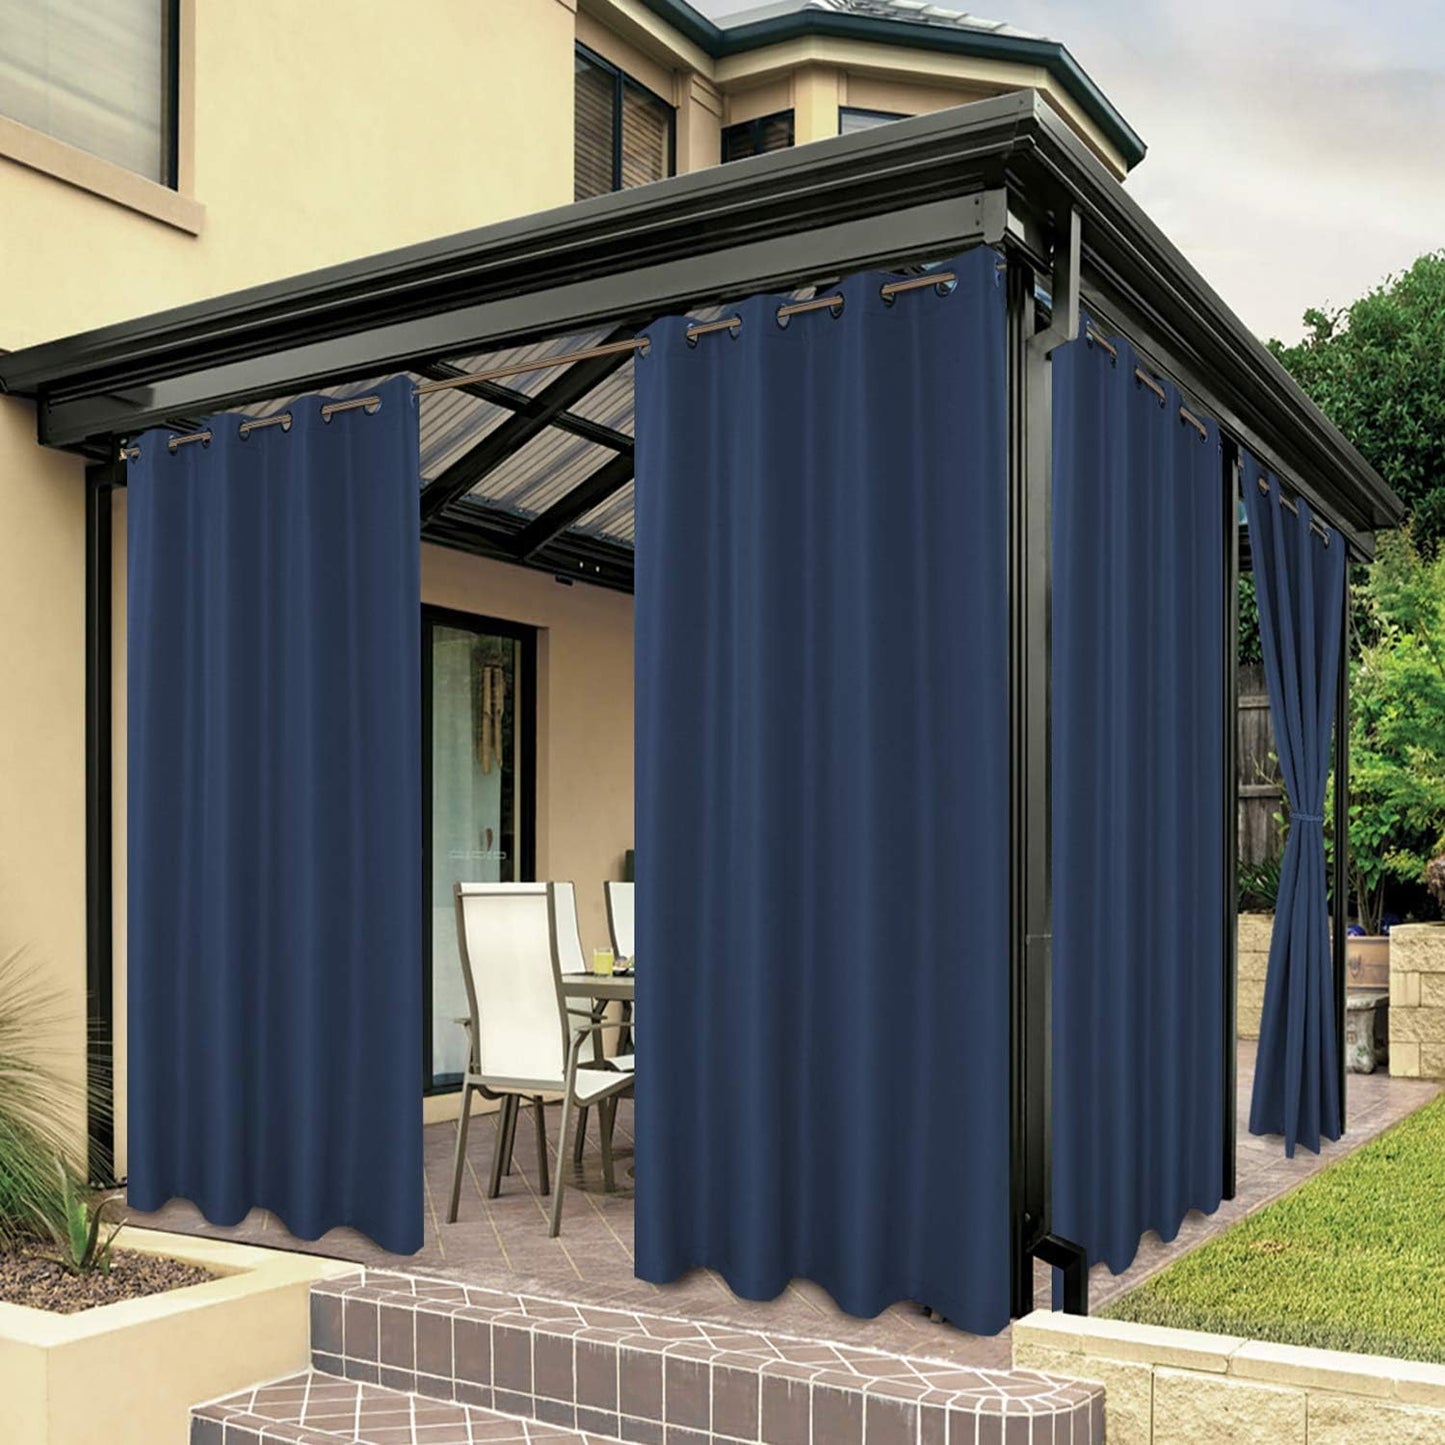 BONZER Outdoor Curtains for Patio Waterproof, Premium Thick Privacy Weatherproof Grommet outside Curtains for Porch, Gazebo, Deck, 1 Panel, 54W X 84L Inch, White  BONZER Navy 84W X 84L Inch 